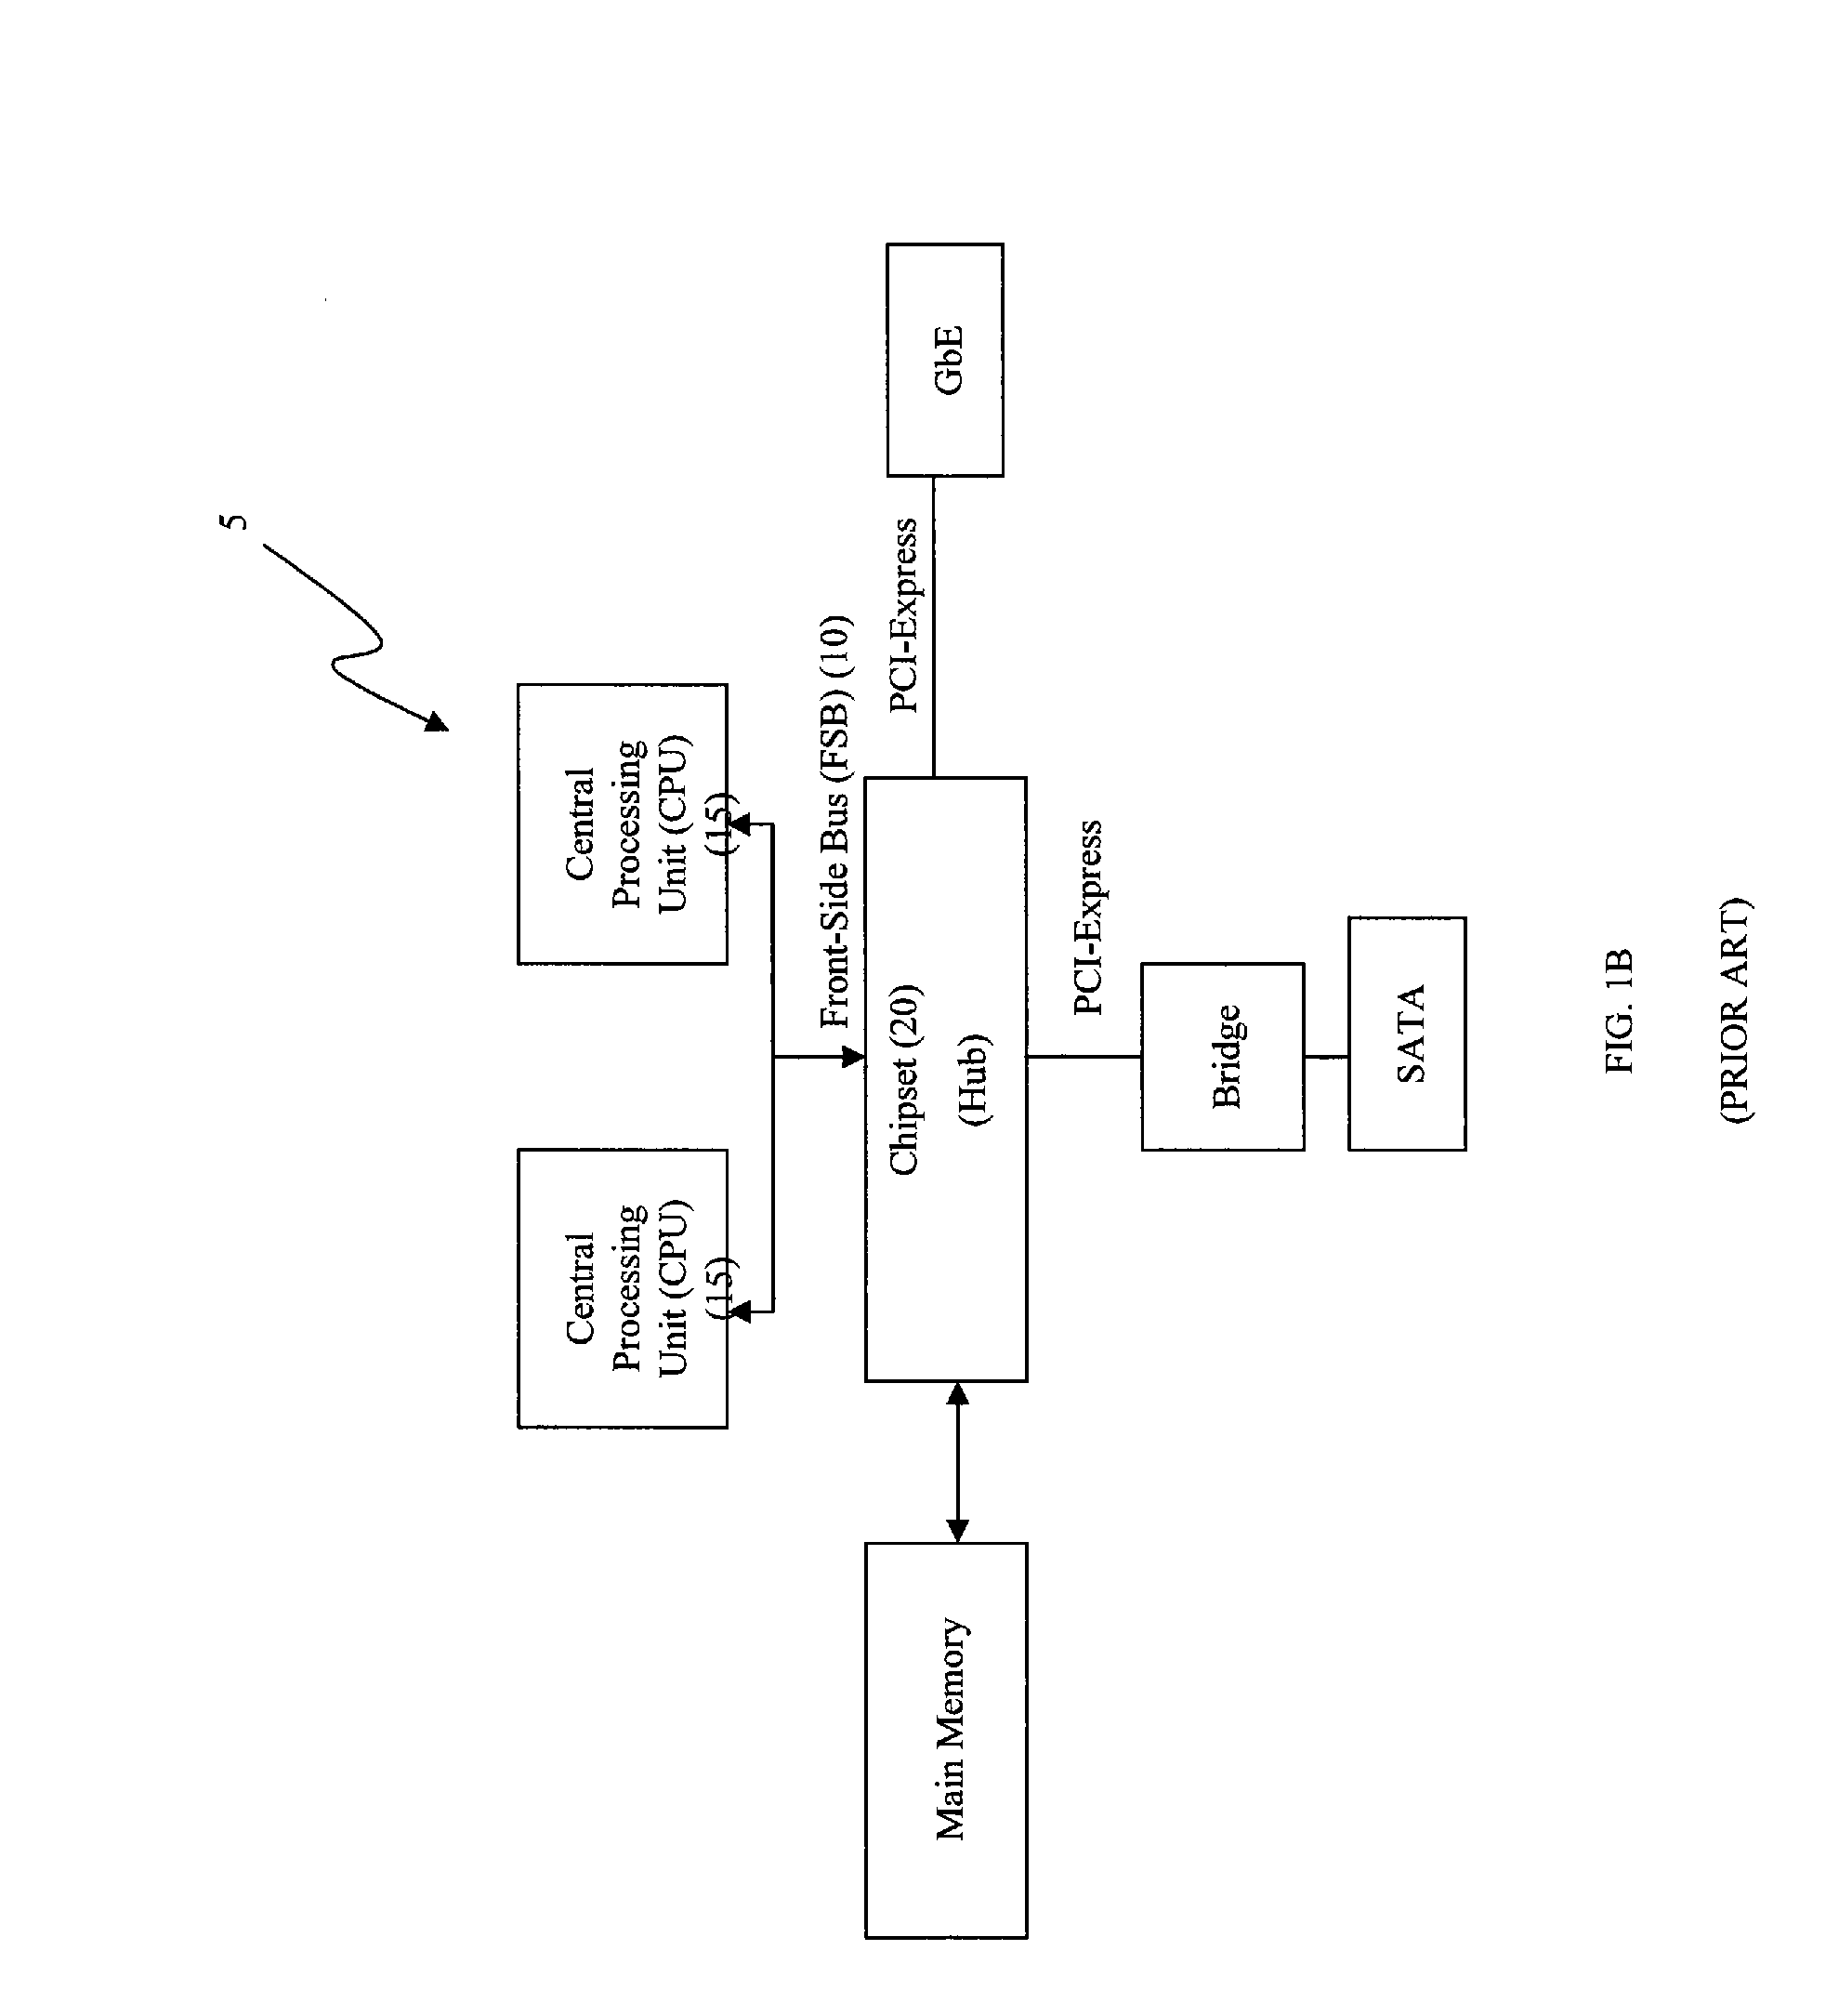 Processor chip arcitecture having integrated high-speed packet switched serial interface